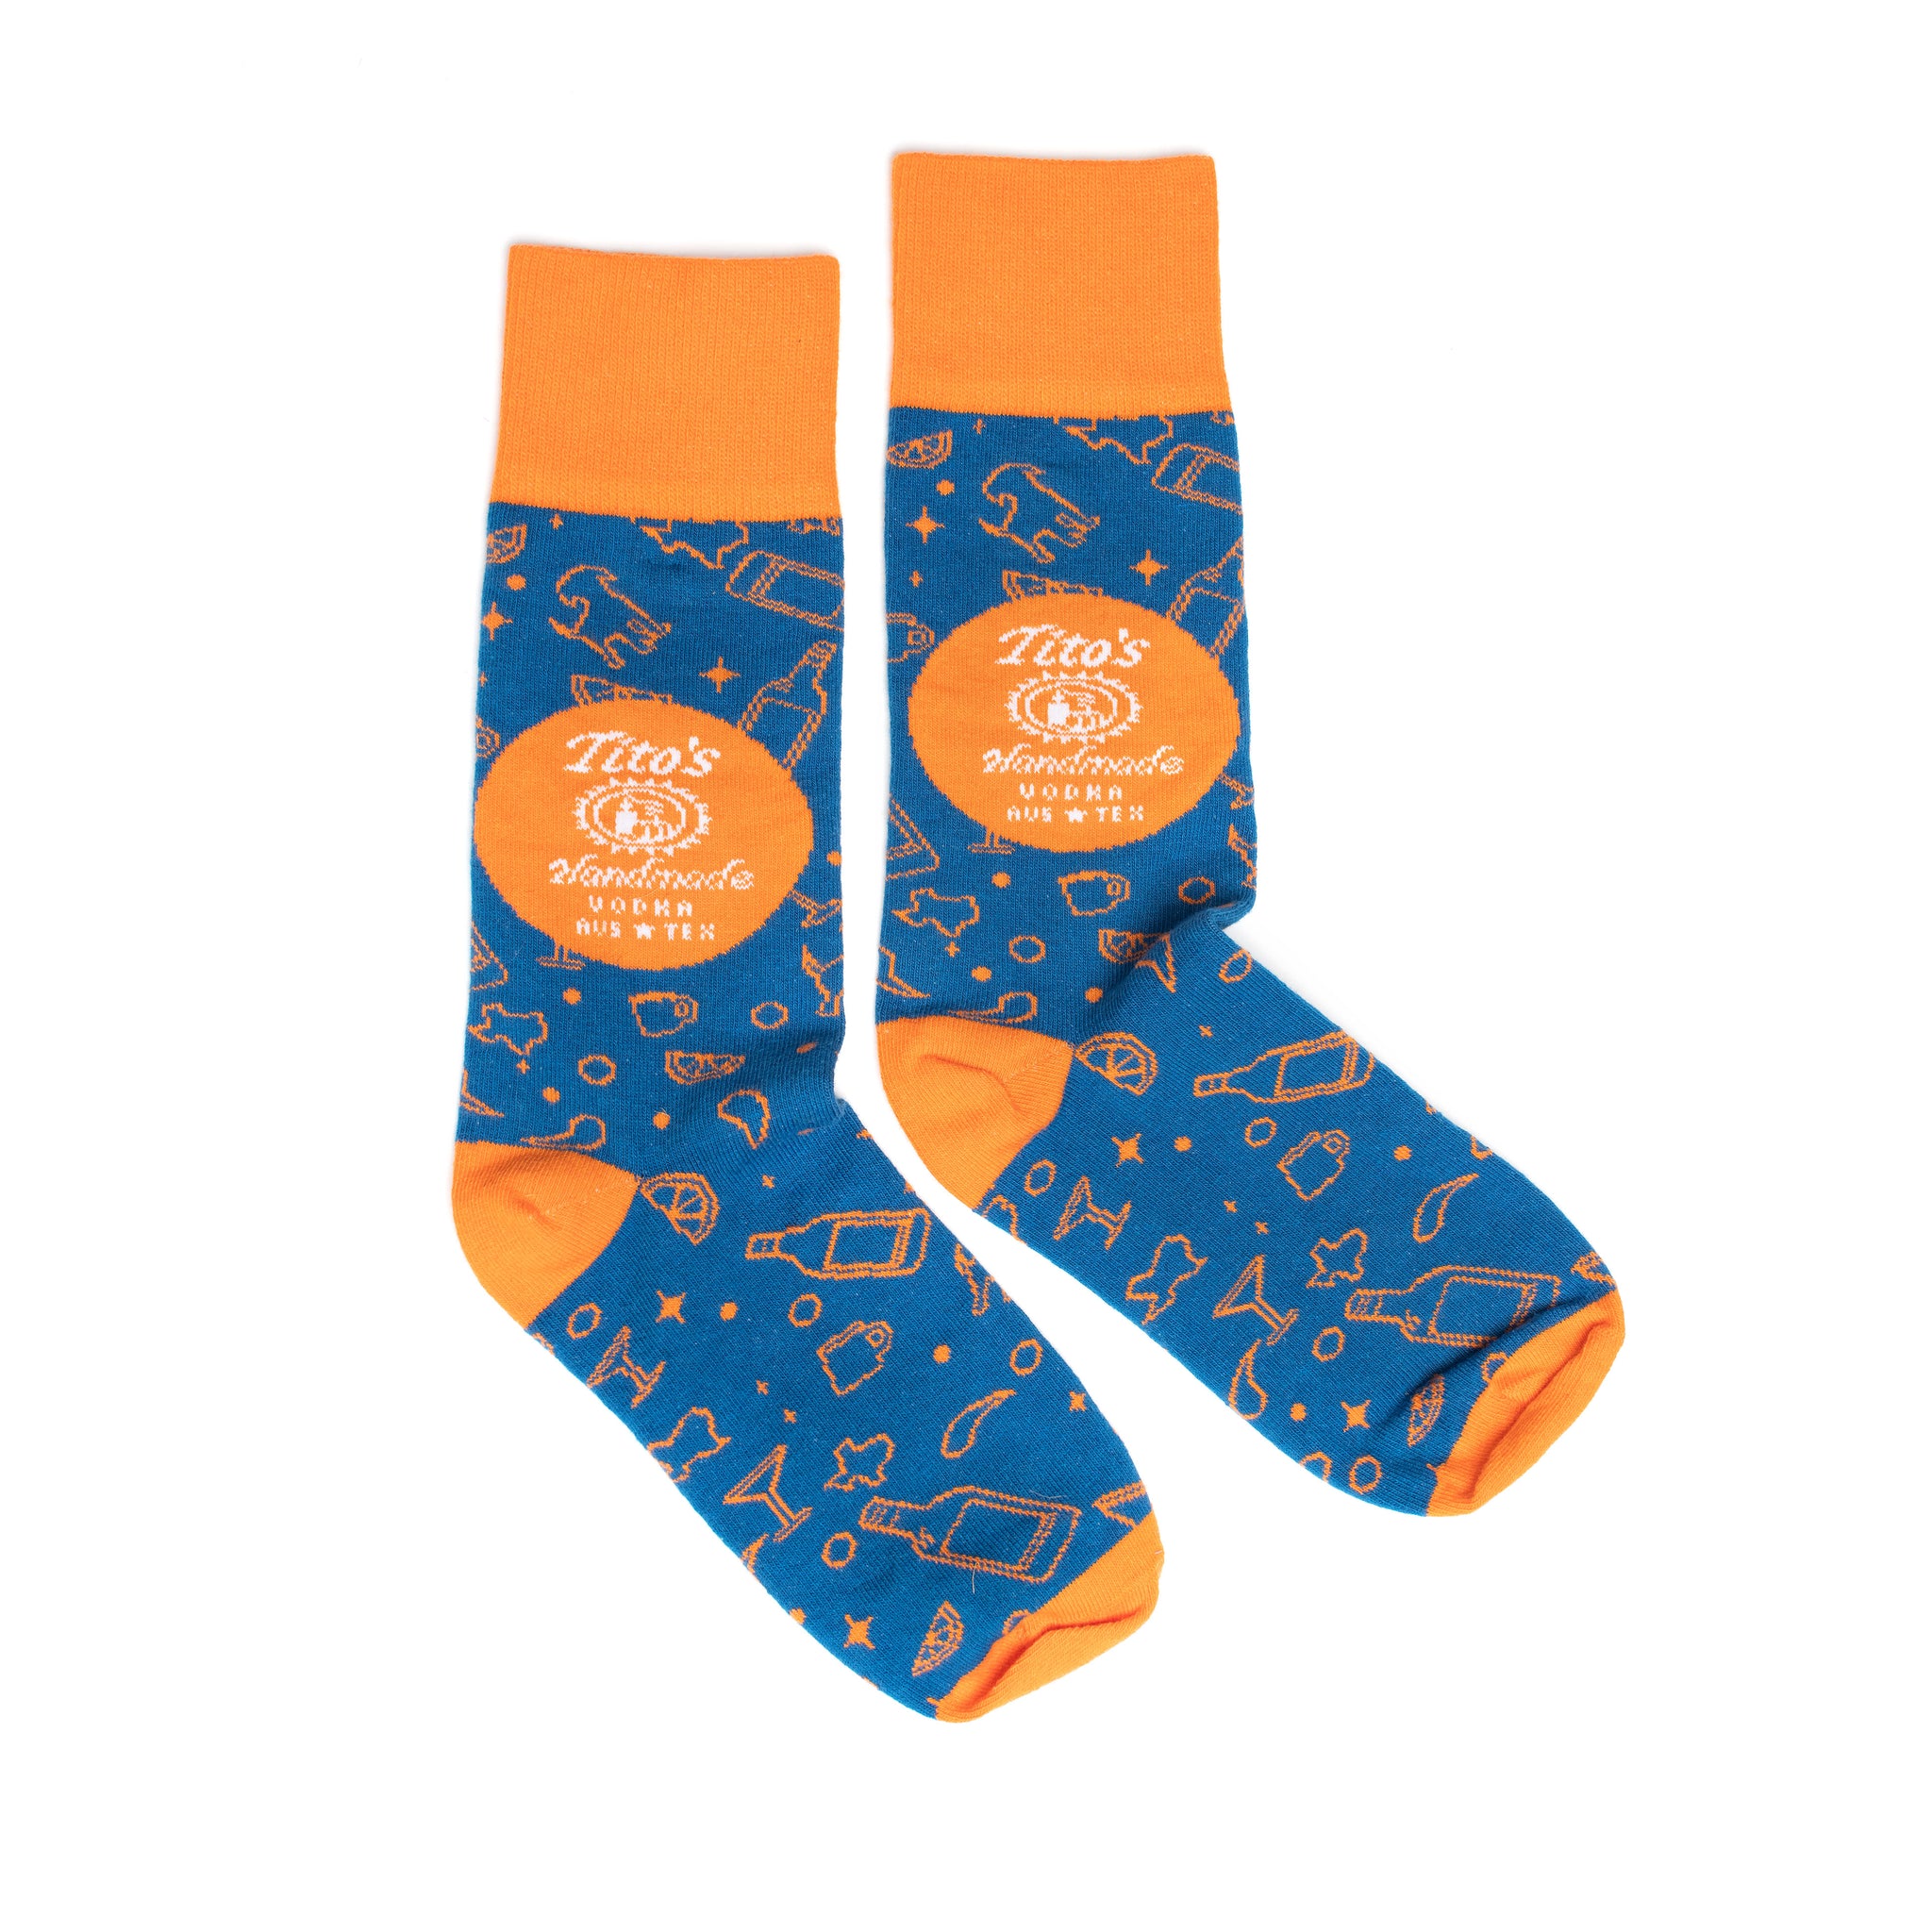 Blue and orange socks with Tito's Handmade Vodka logo and cocktail designs